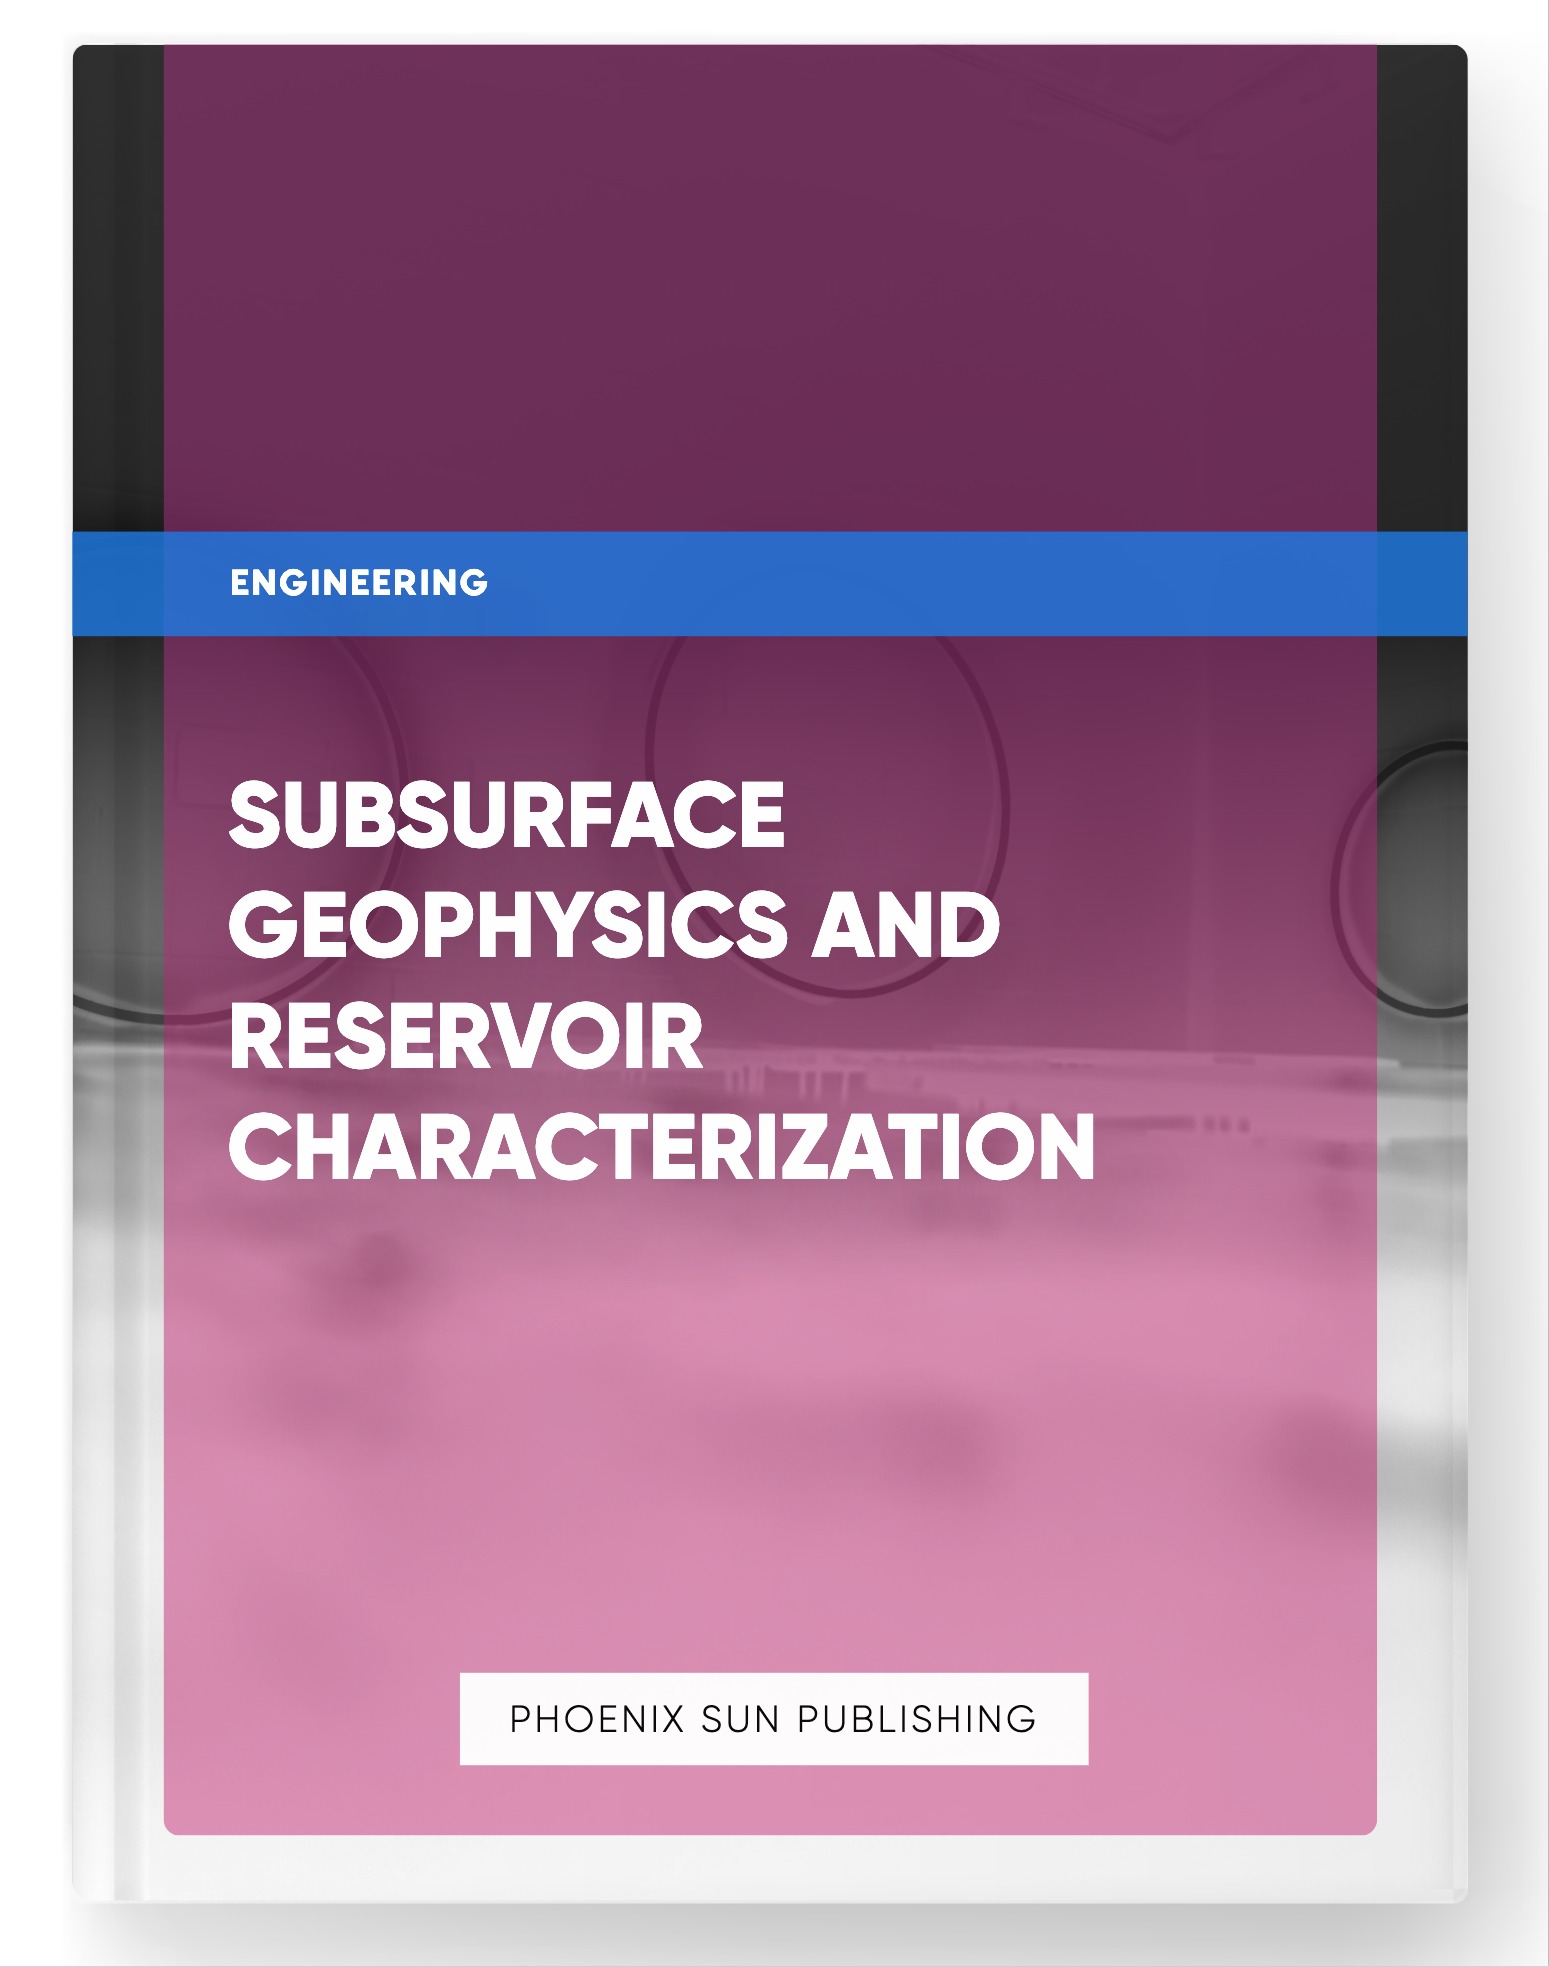 Subsurface Geophysics and Reservoir Characterization